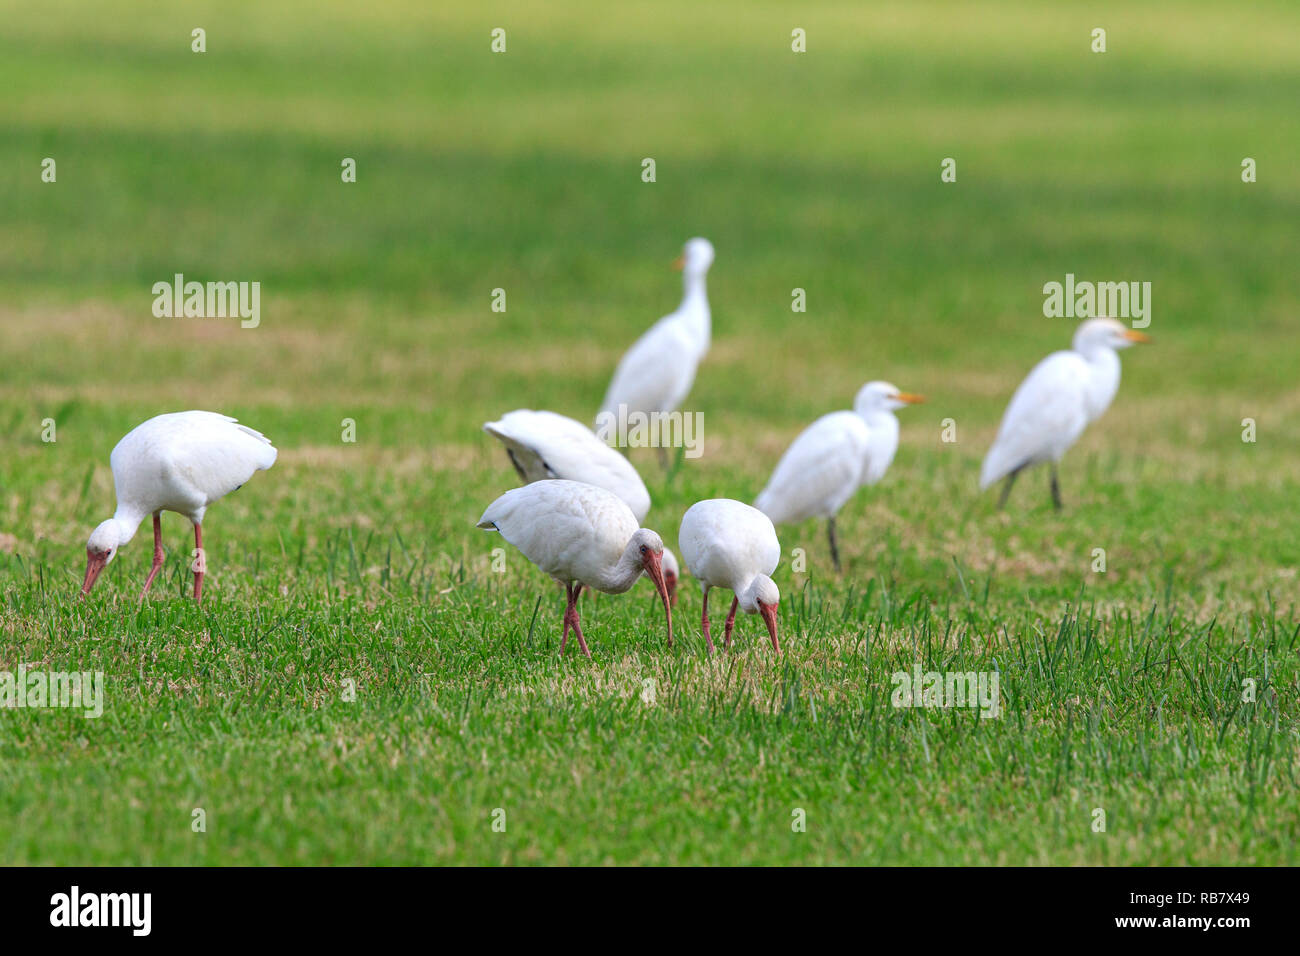 White Ibises and great egrets foraging on grass. Stock Photo